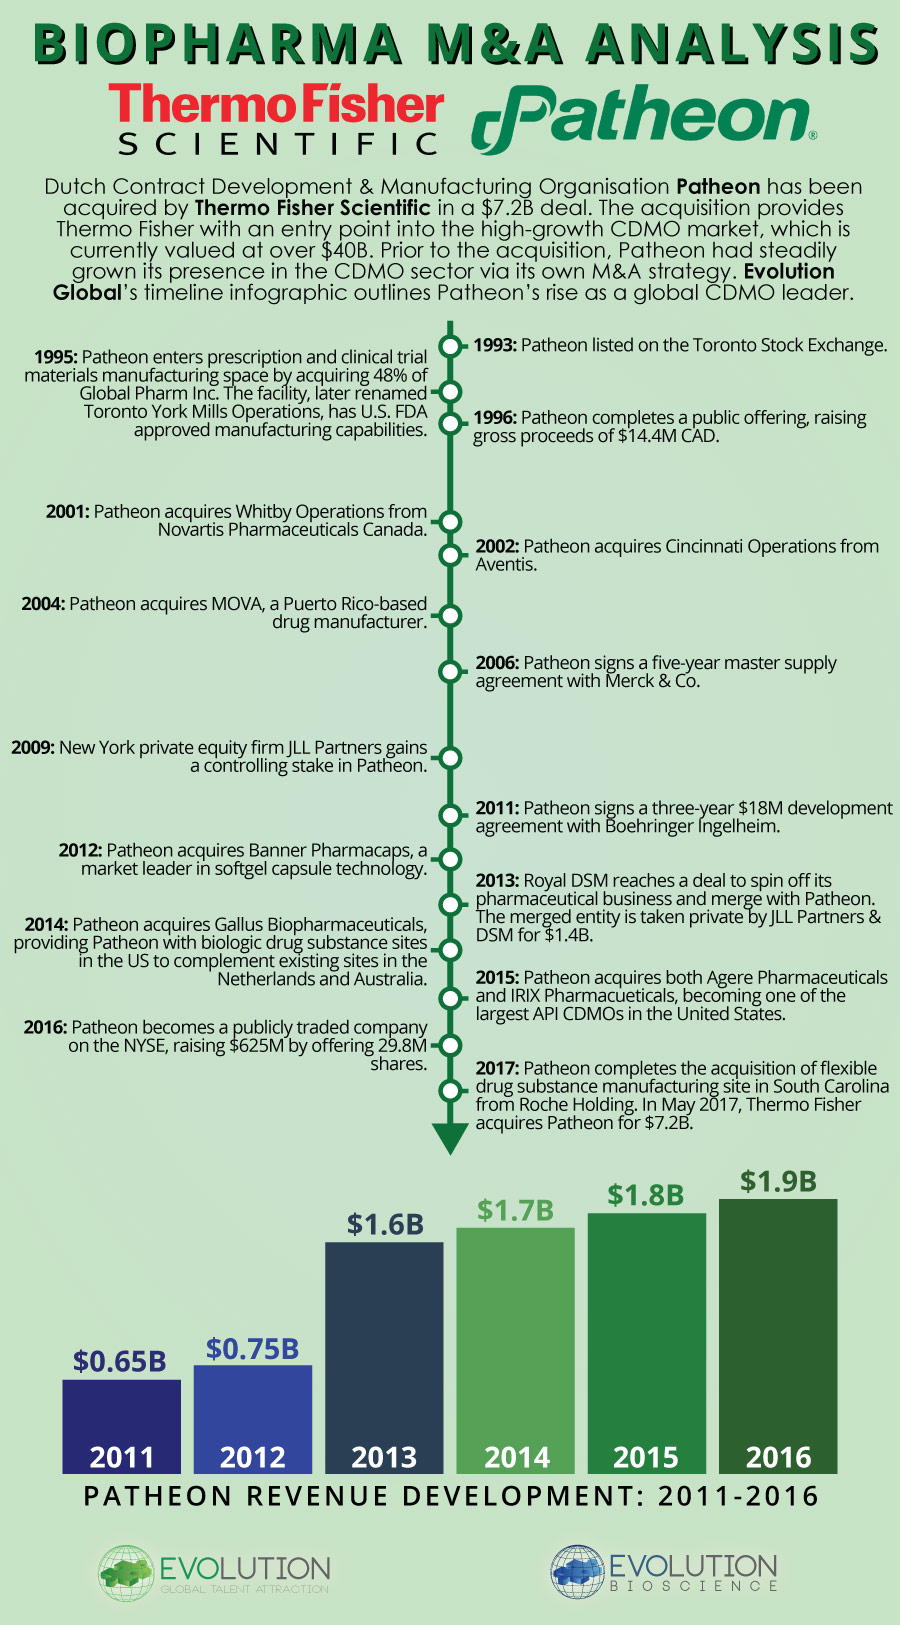 Thermo Fisher & Patheon - A Timeline Infographic by Evolution Global